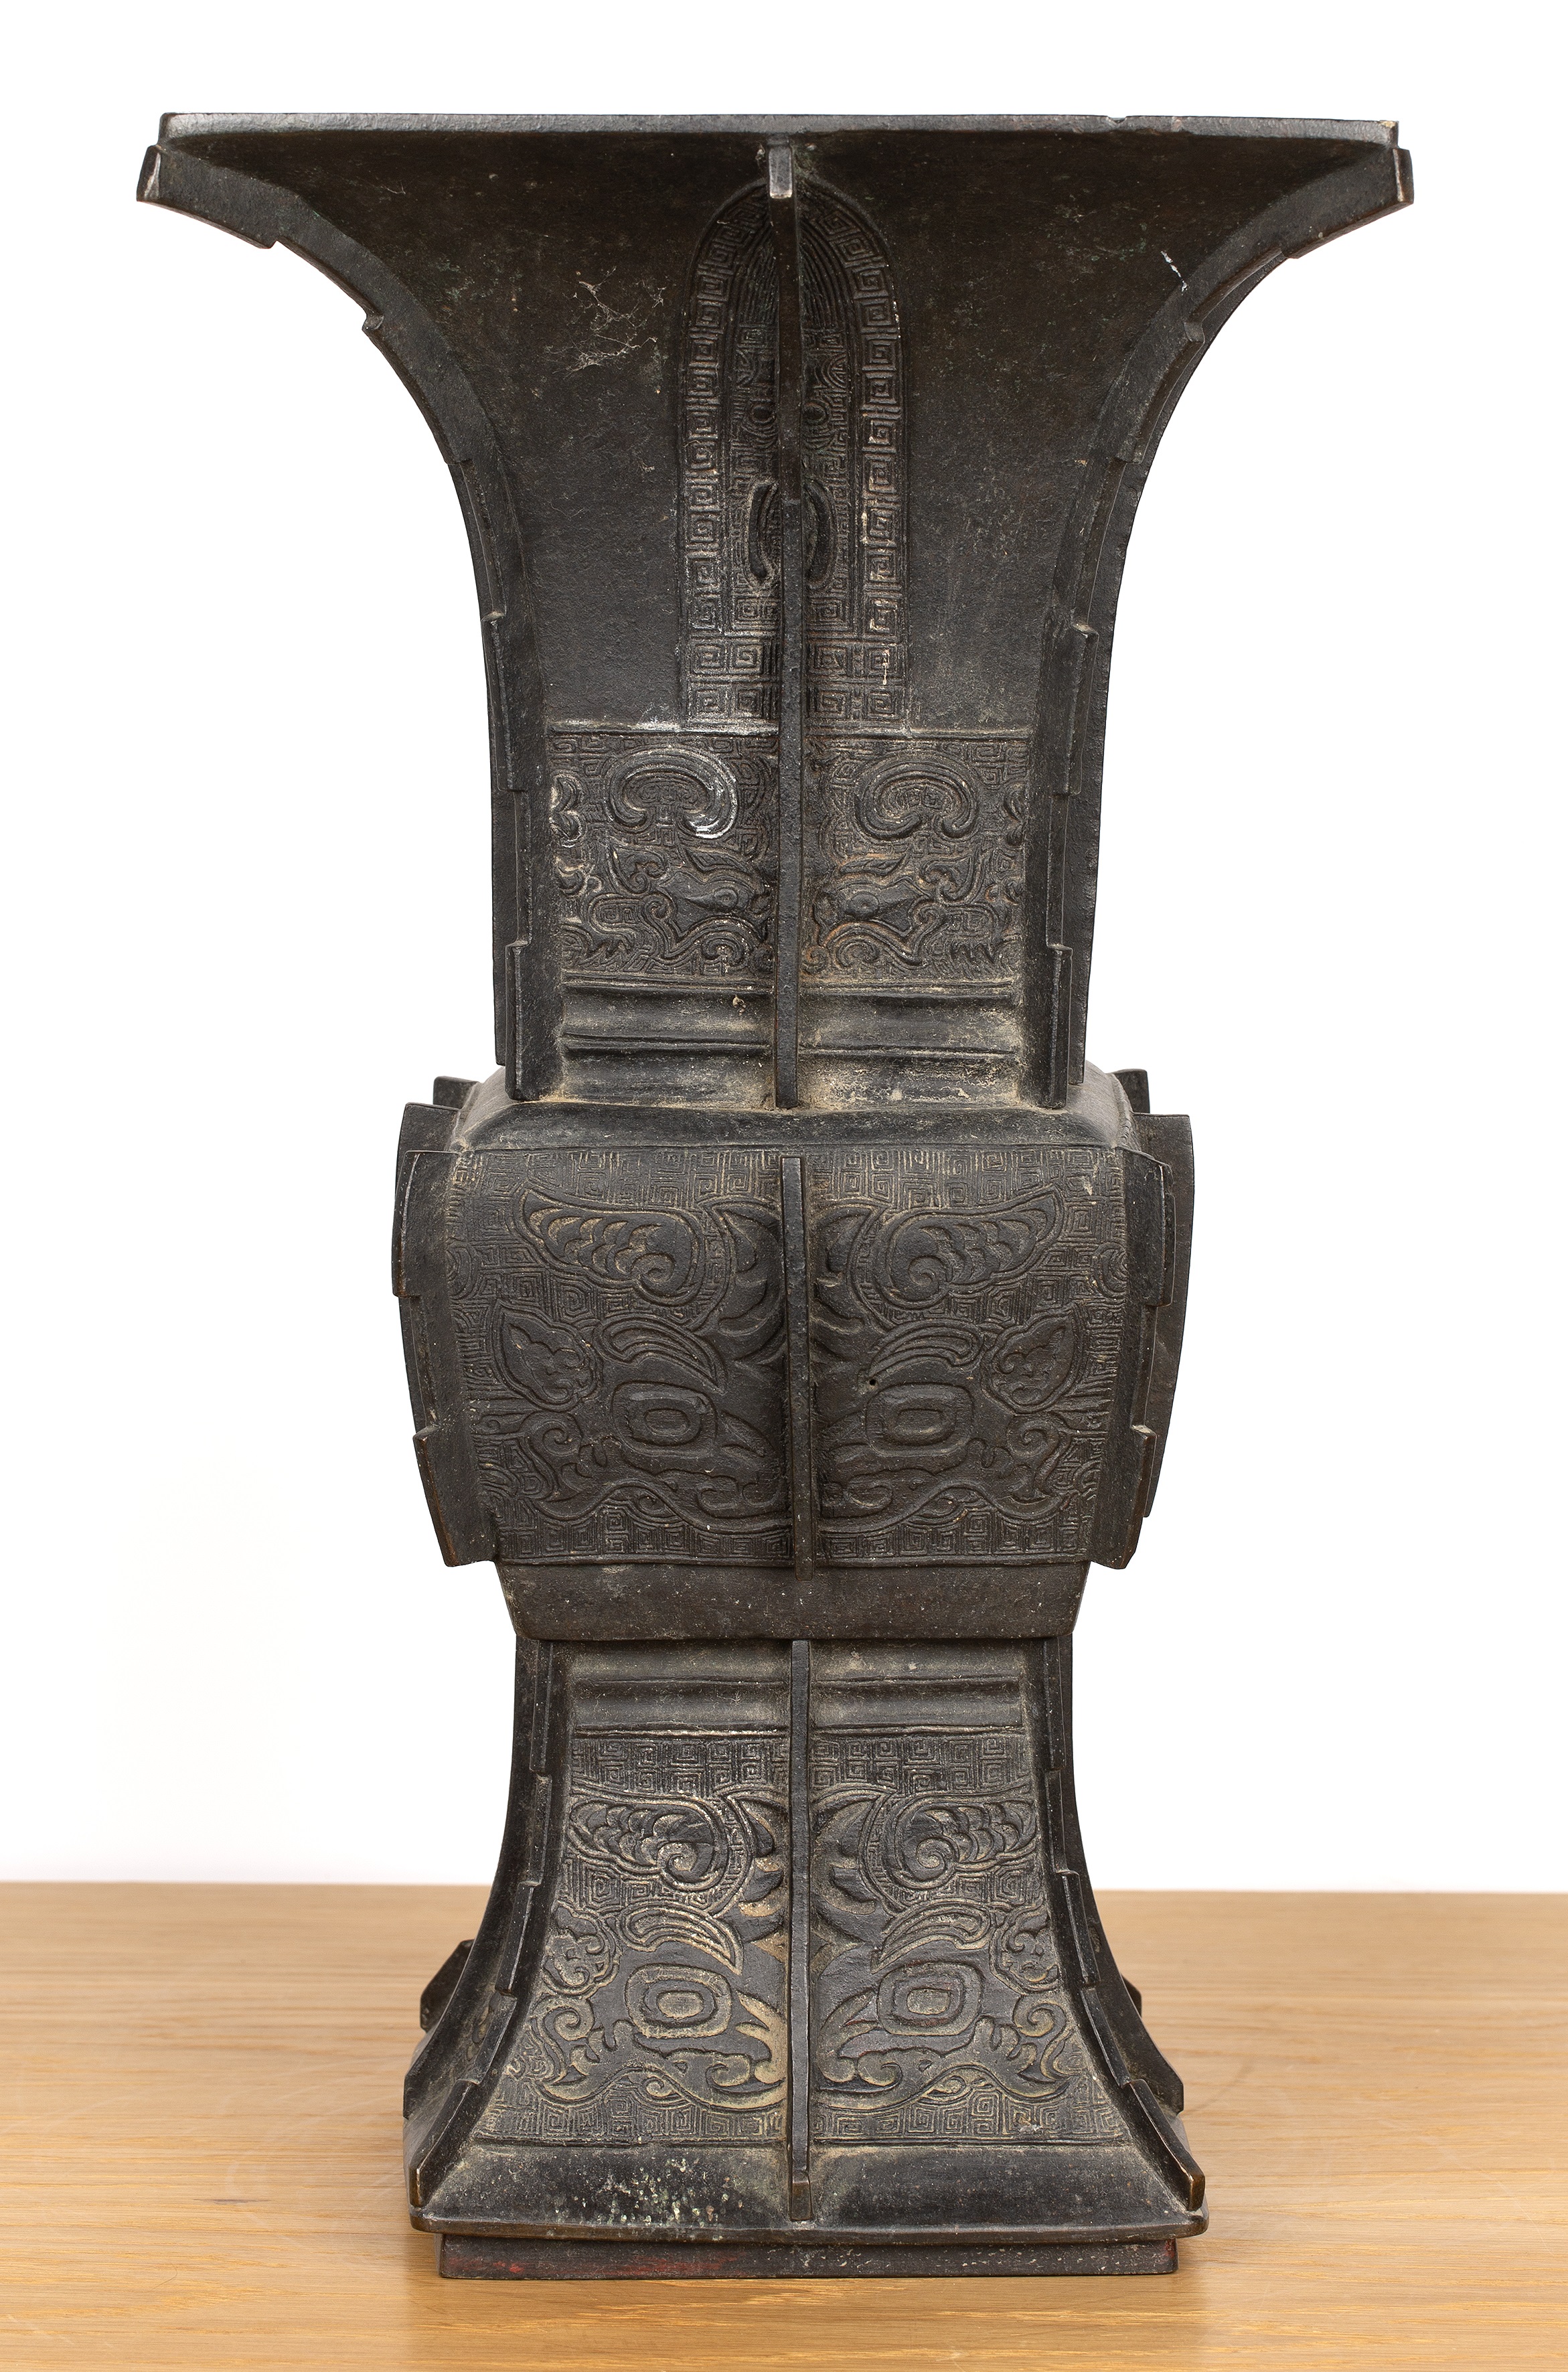 Large bronze archaic Gu form vessel Chinese, 19th Century with raised bands, and panels of taotie - Image 4 of 16